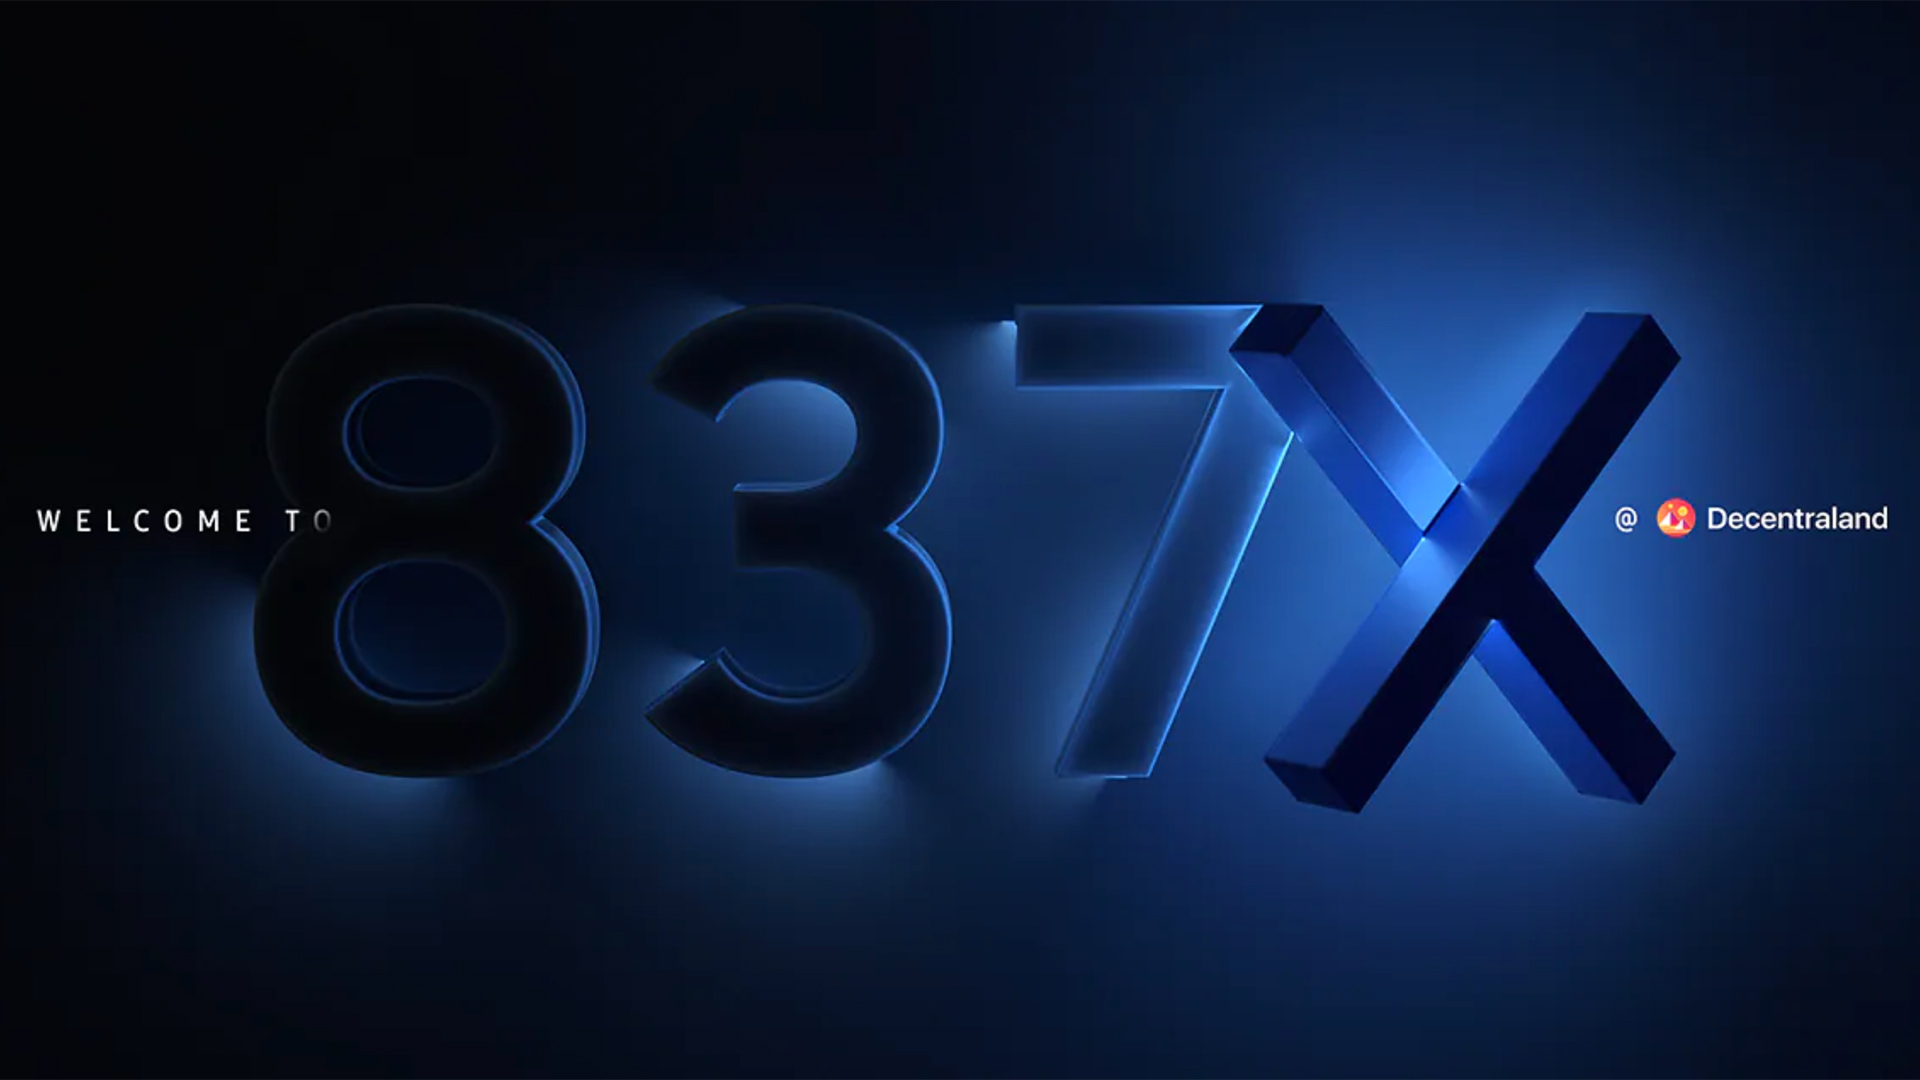 The 837X logo for the Samsung Galaxy Unpacked launch event in the Metaverse